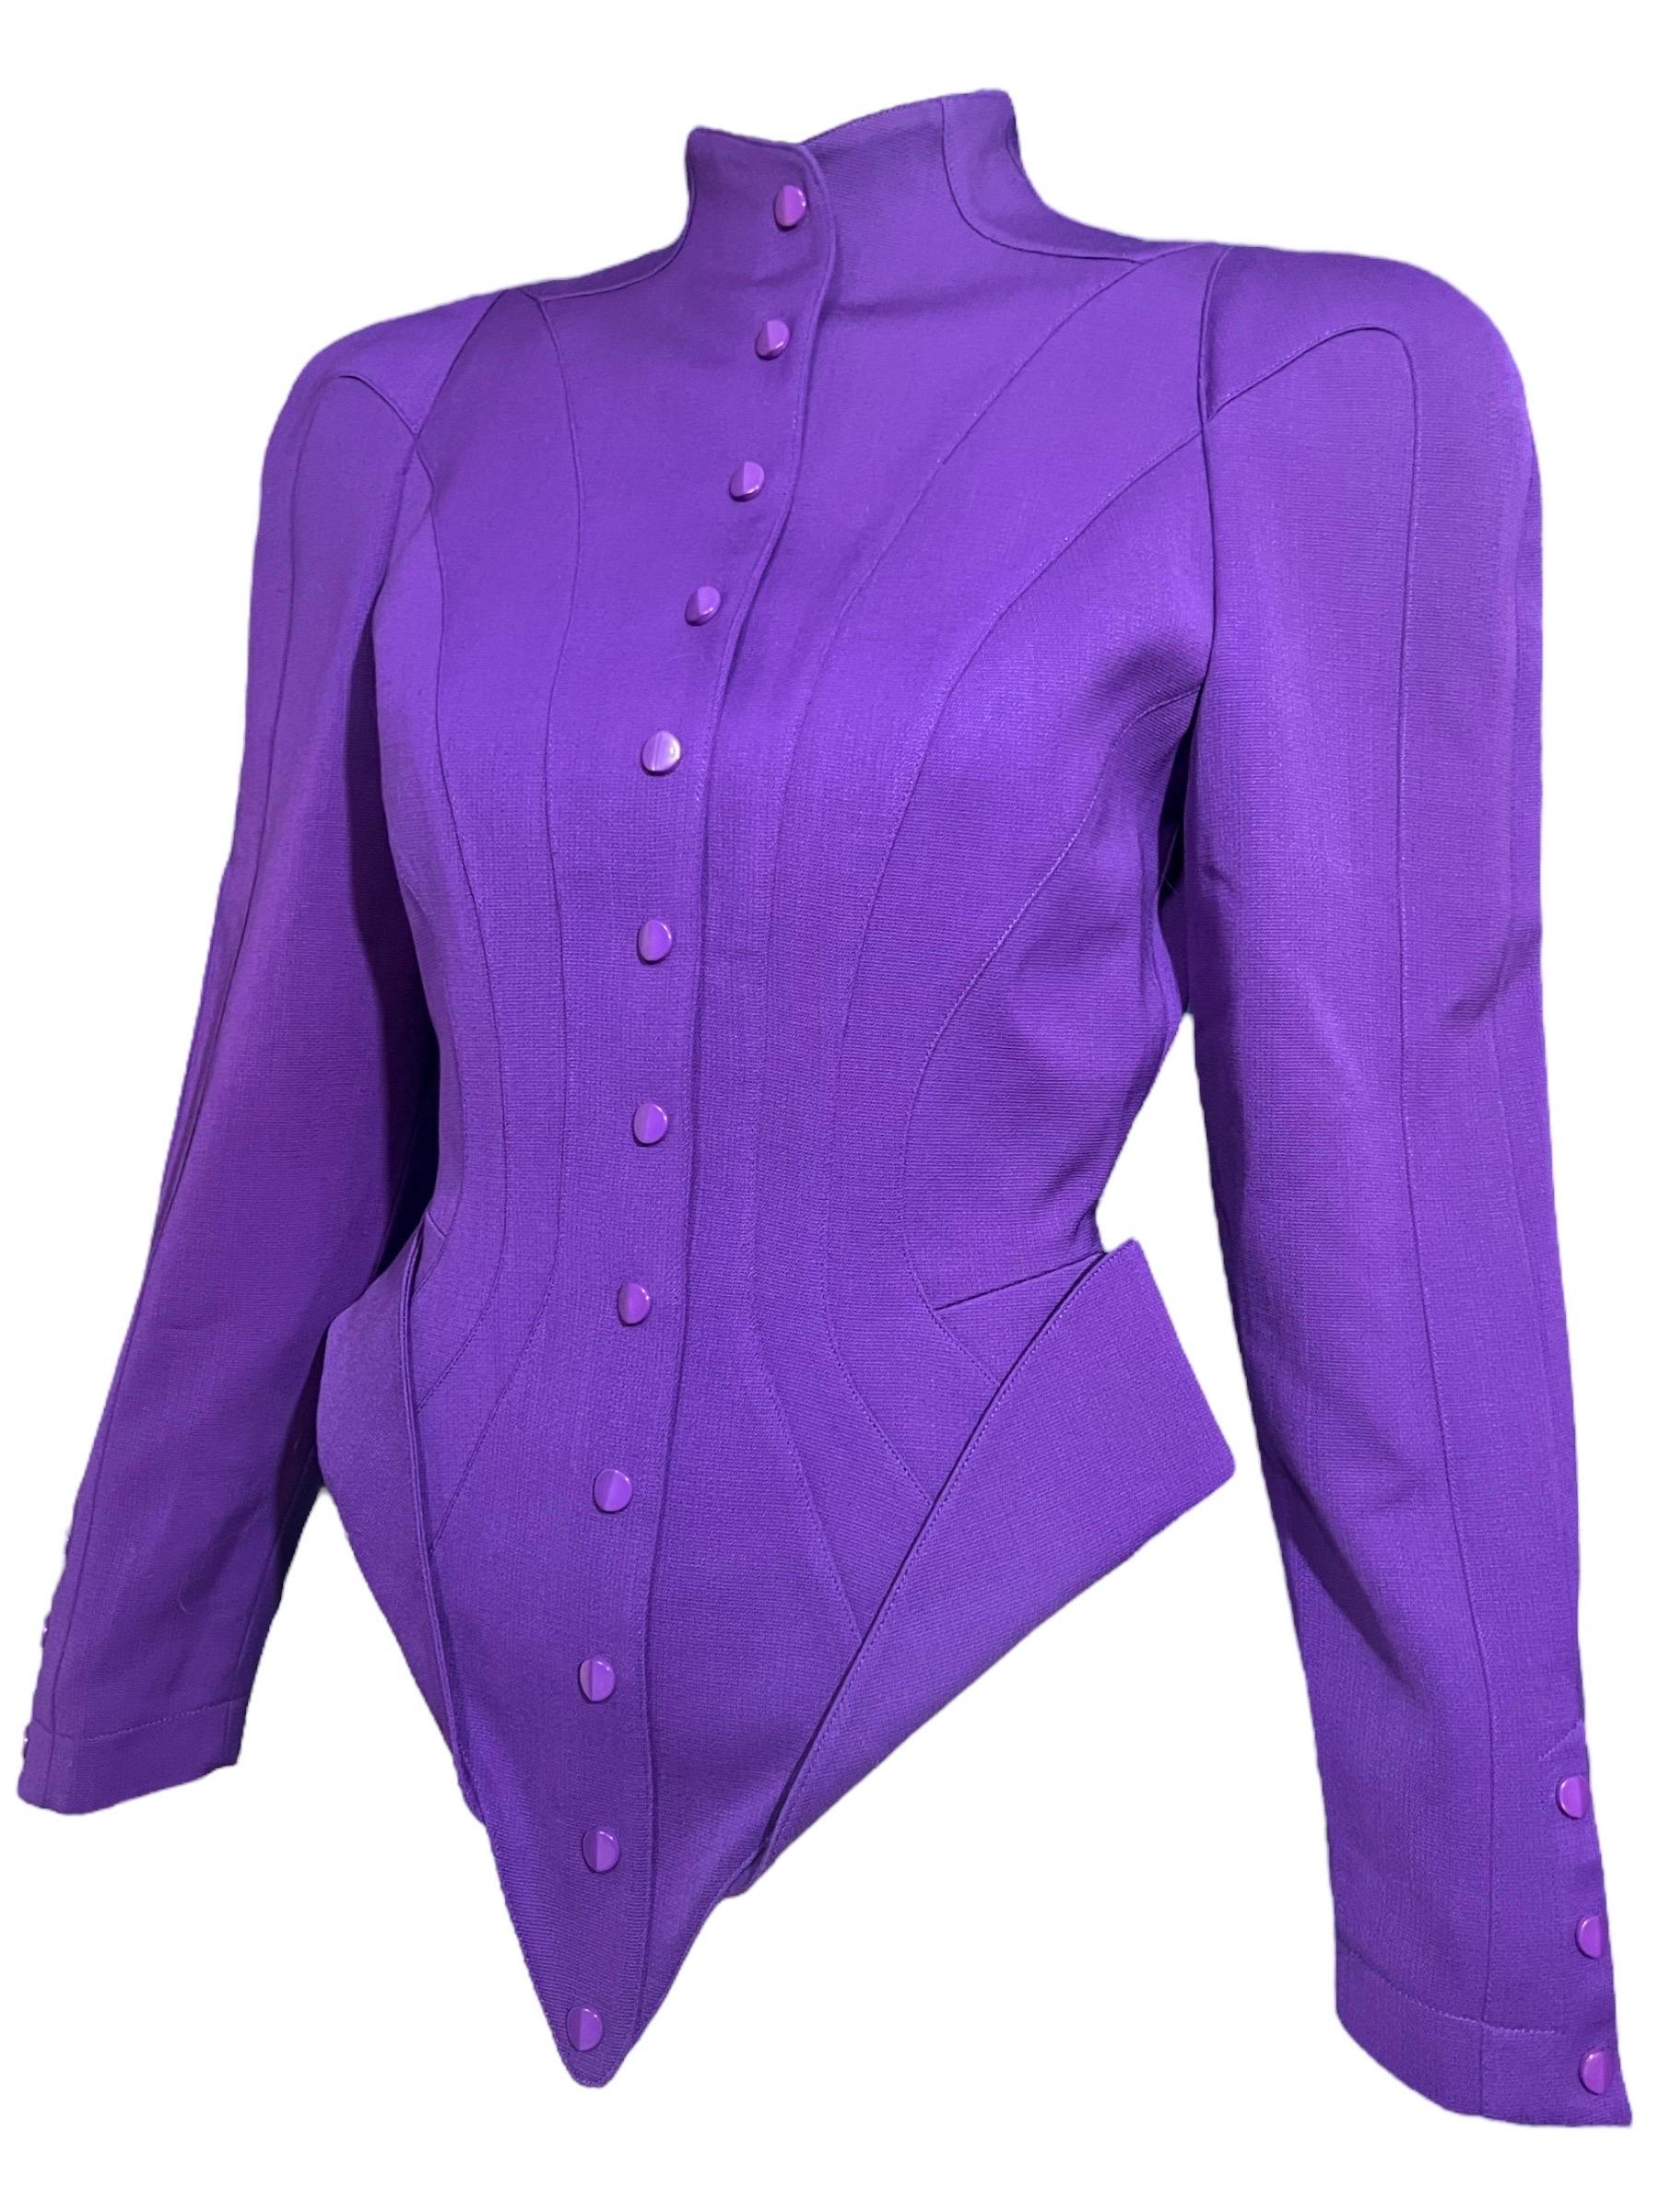 F/W 1988 Thierry Mugler Purple Futuristic Les Infernales Sculptural Jacket For Sale 1